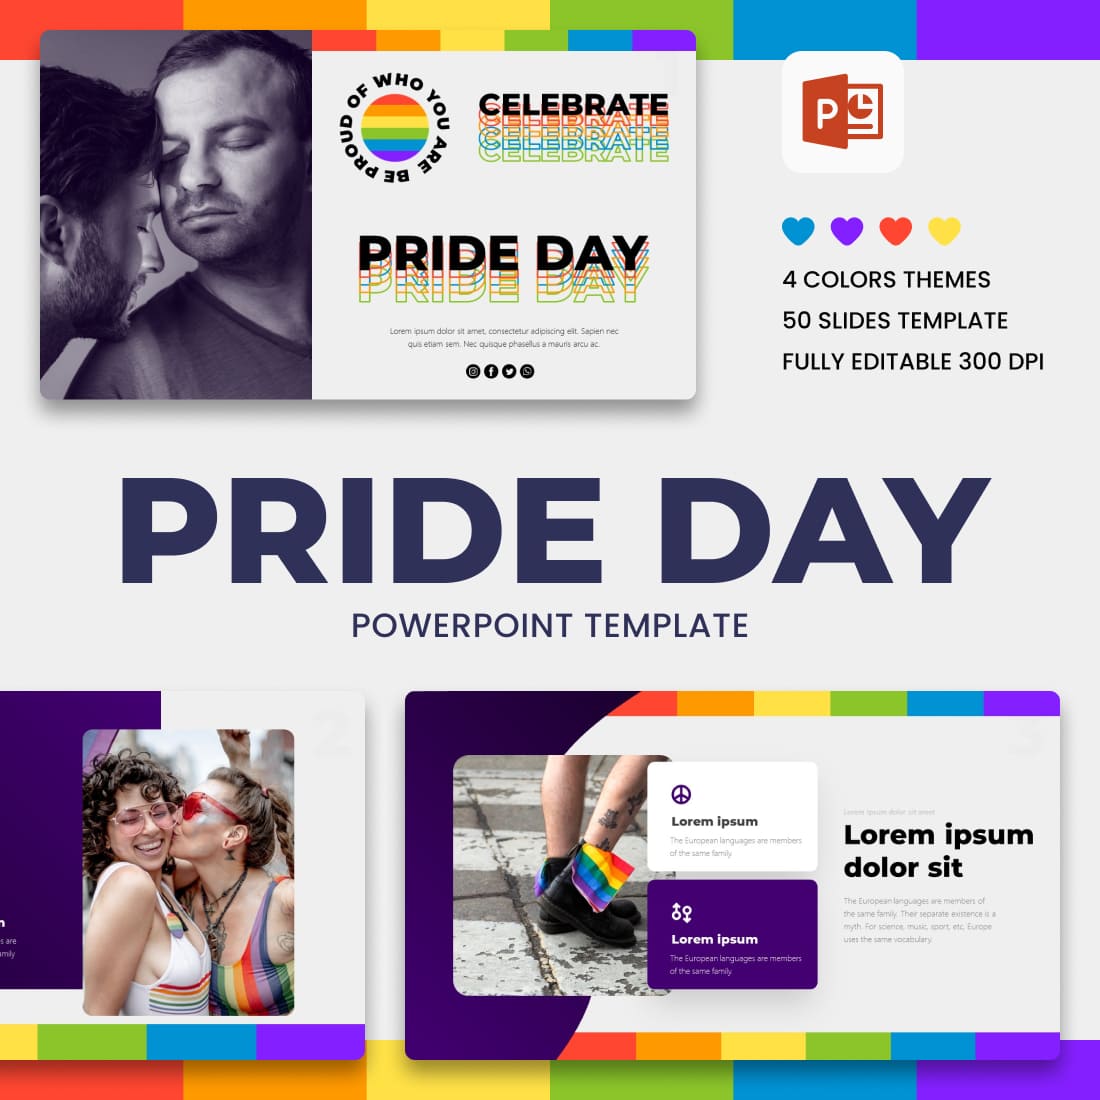 Pride Day PowerPoint Template.